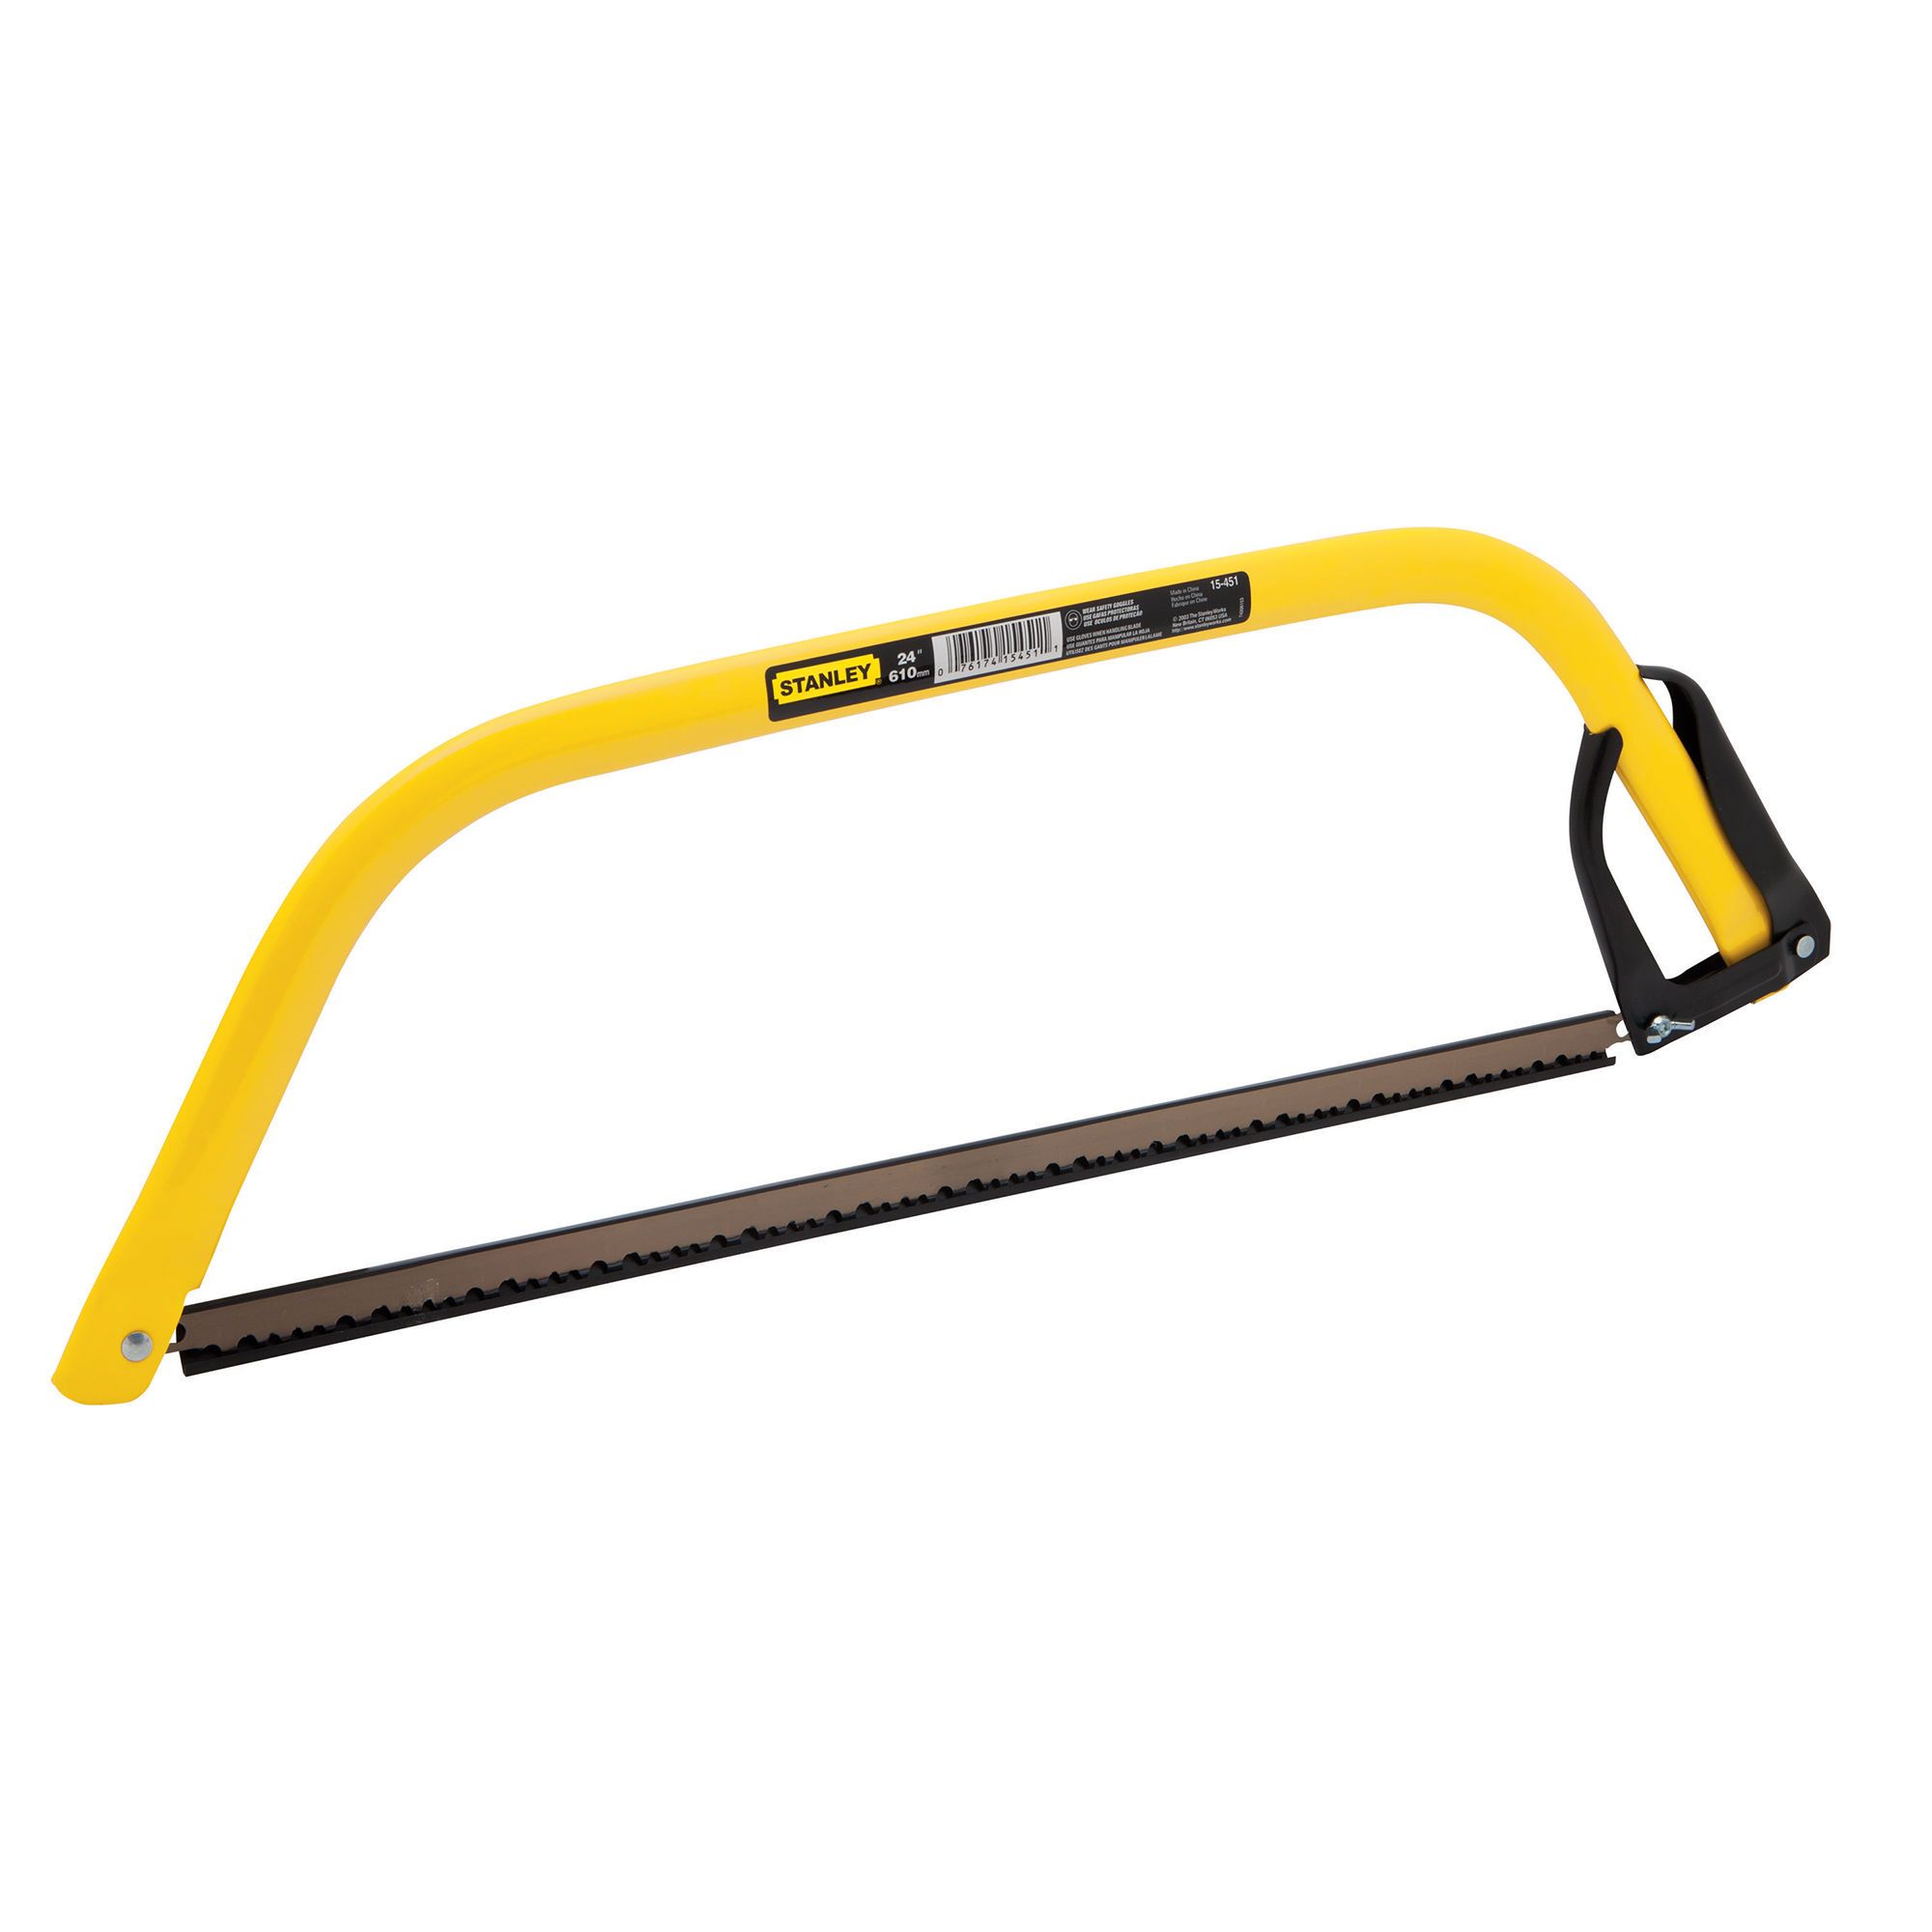 Bow Saw - Stanley - 24" - Yellow from STANLEY | BMR